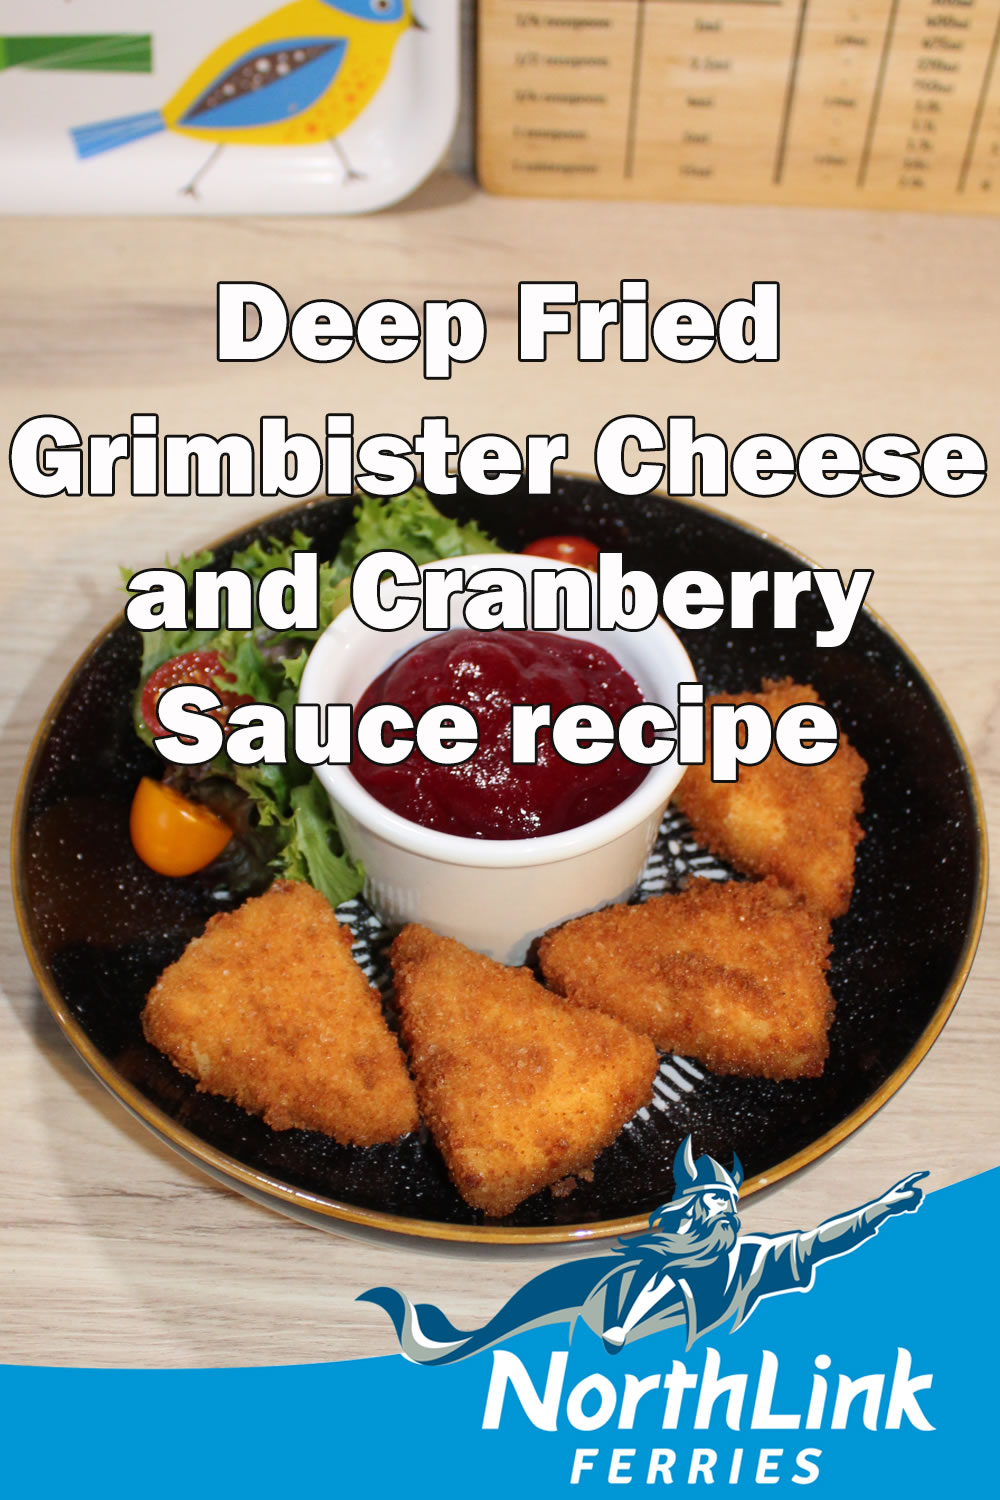 Deep Fried Grimbister Cheese and Cranberry Sauce recipe